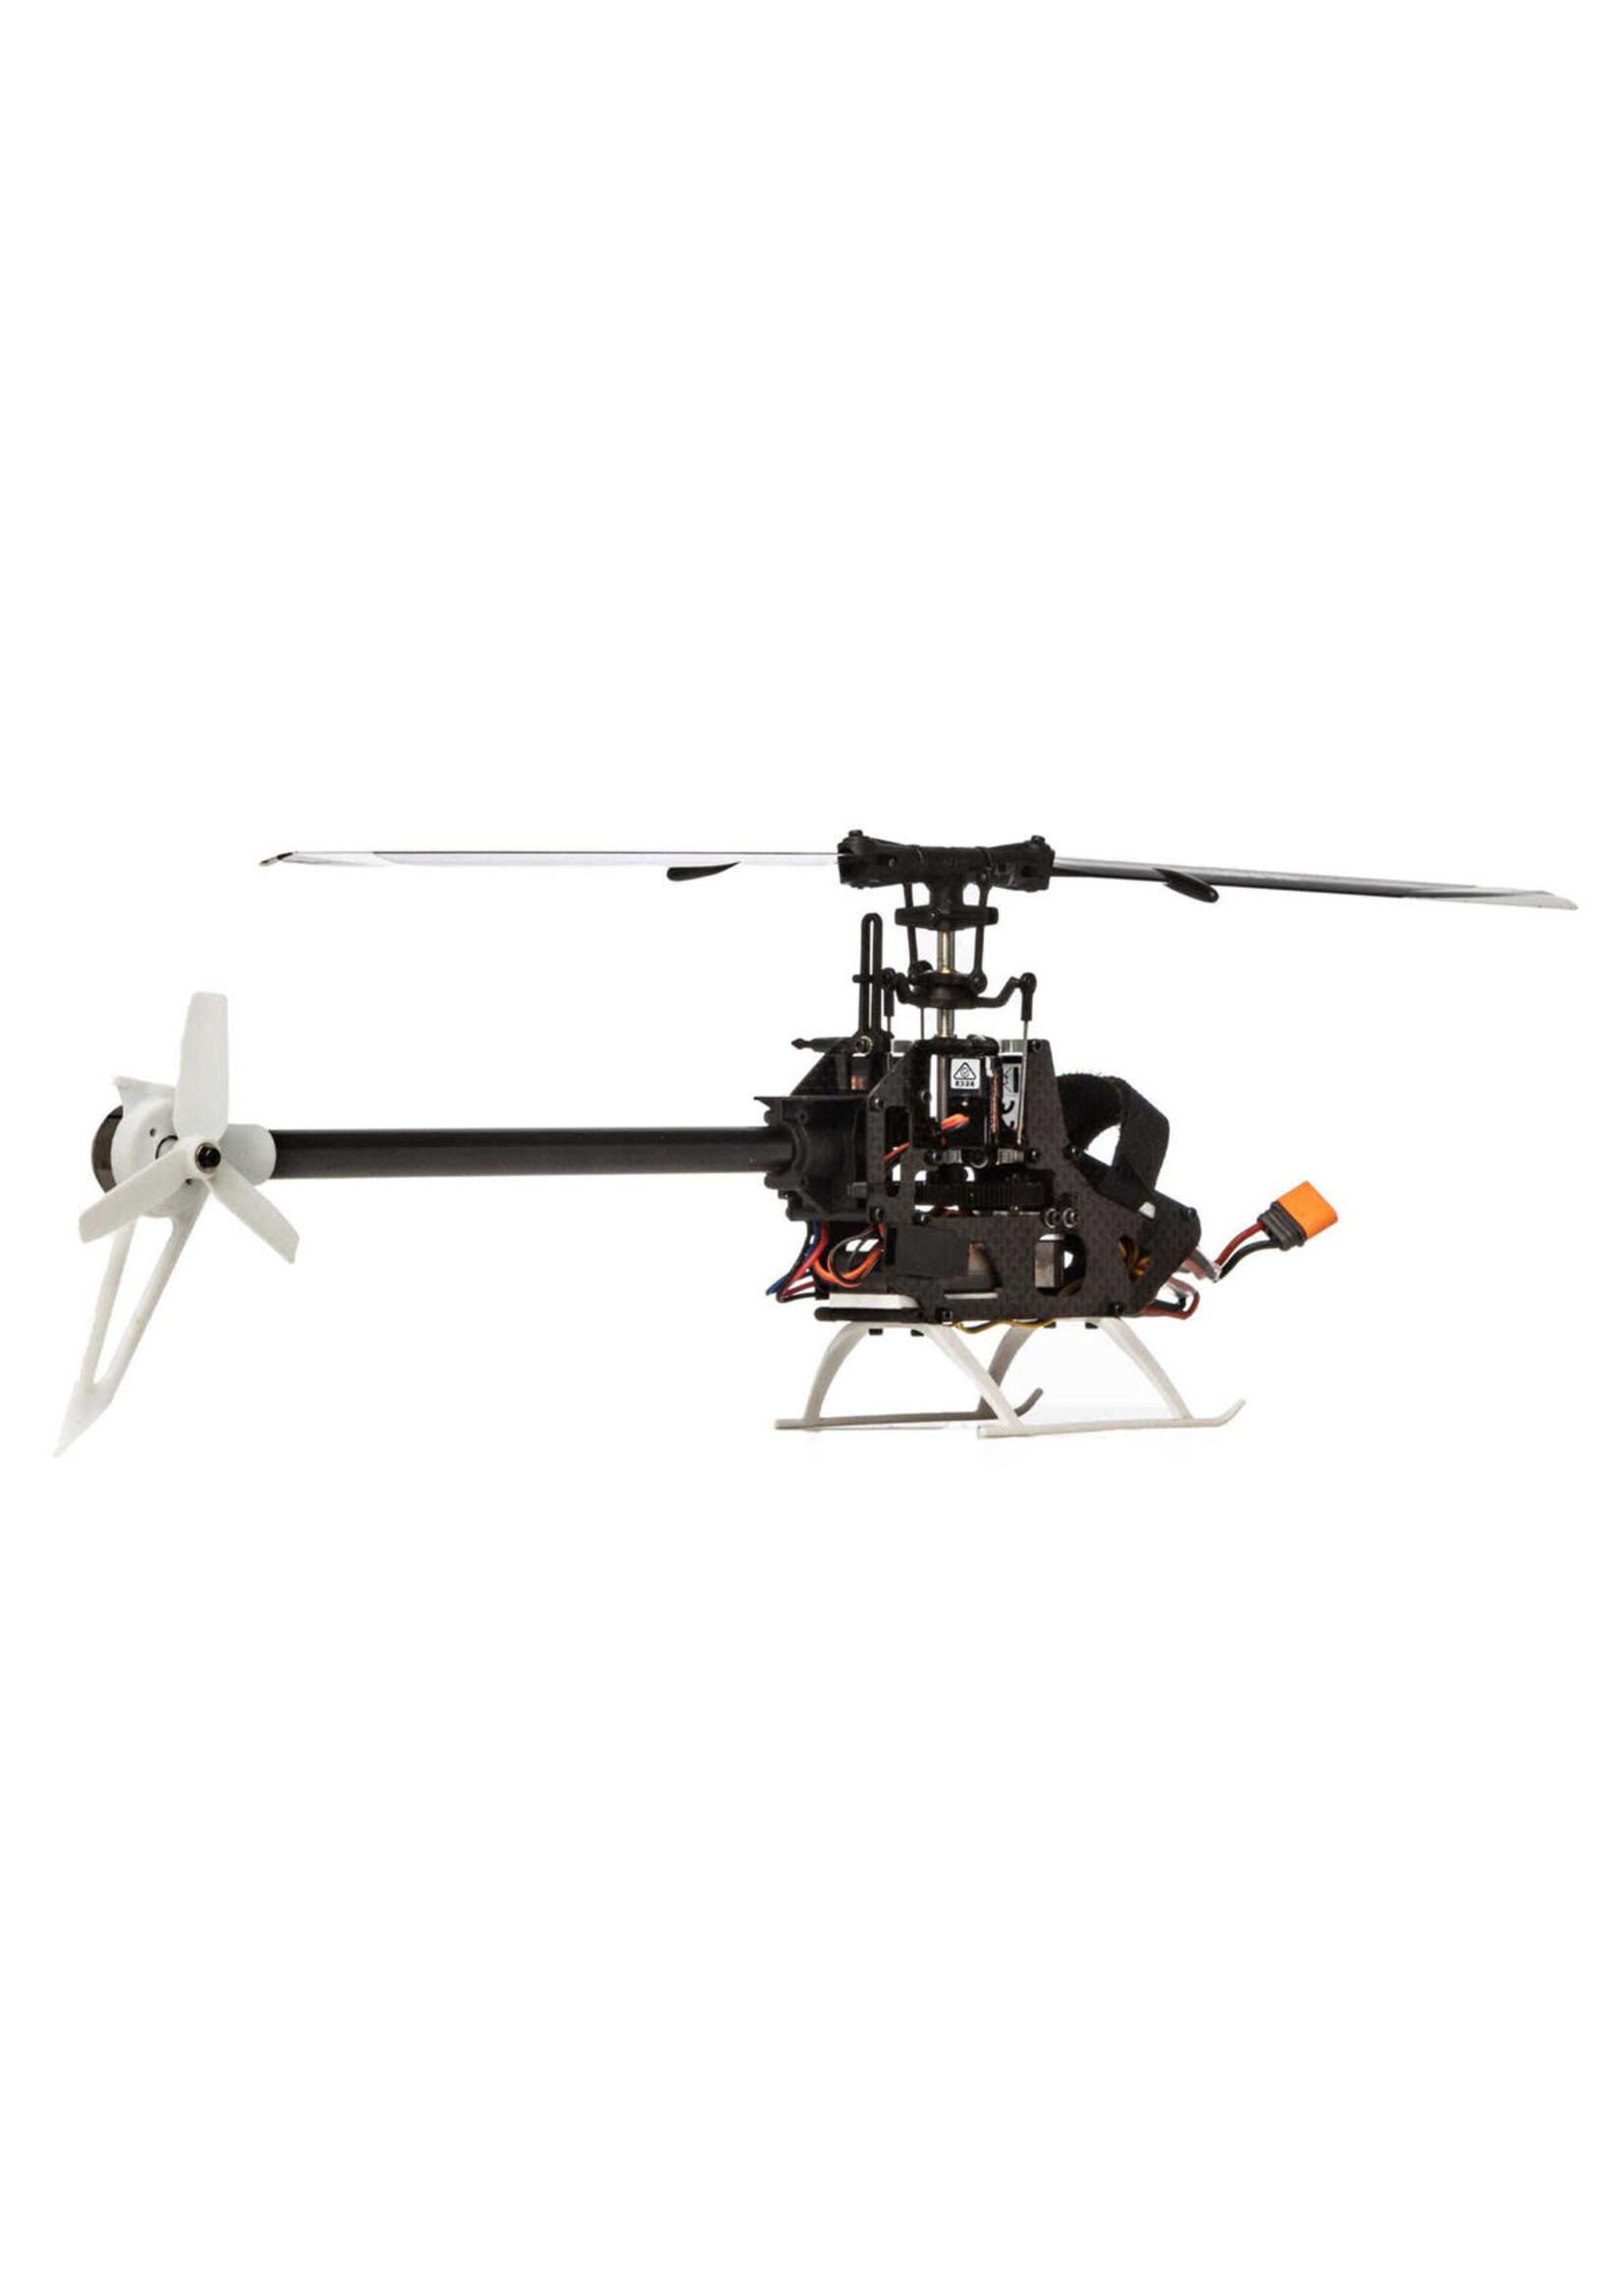 Blade BLH54550 Blade 150 S Smart BNF Basic Electric Helicopter w/AS3X & SAFE Technology